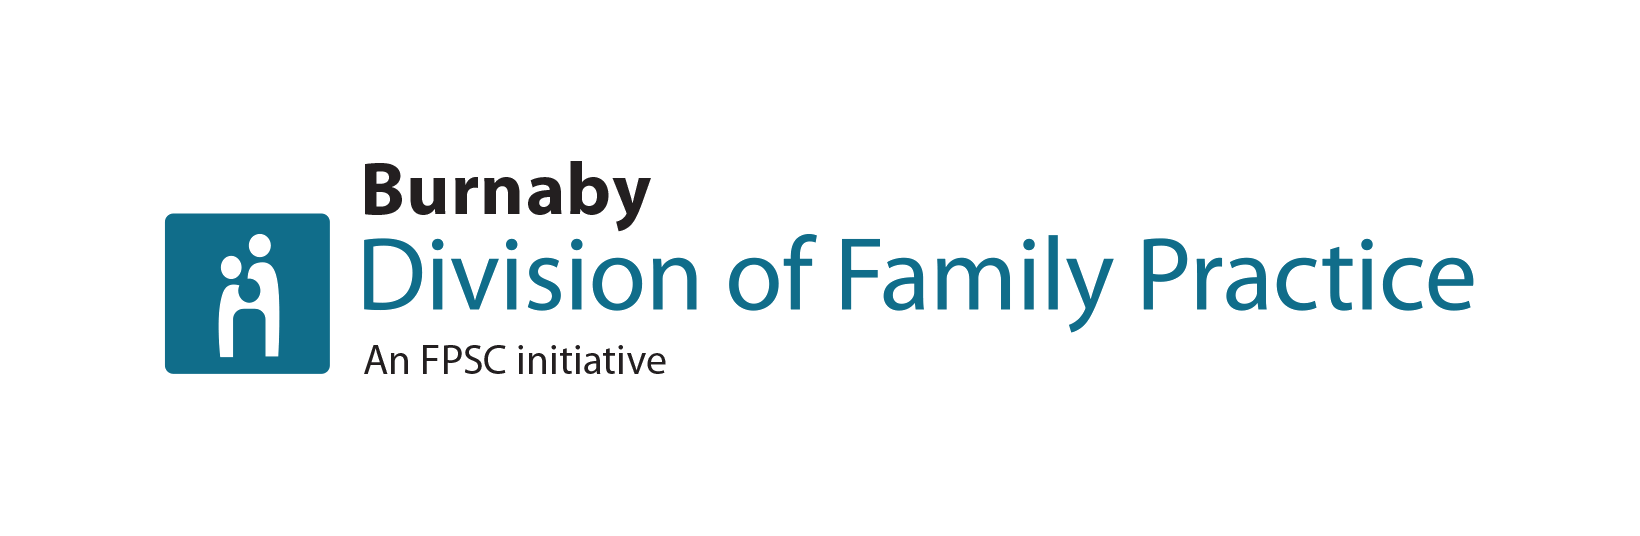 Burnaby Division of Family Practice logo